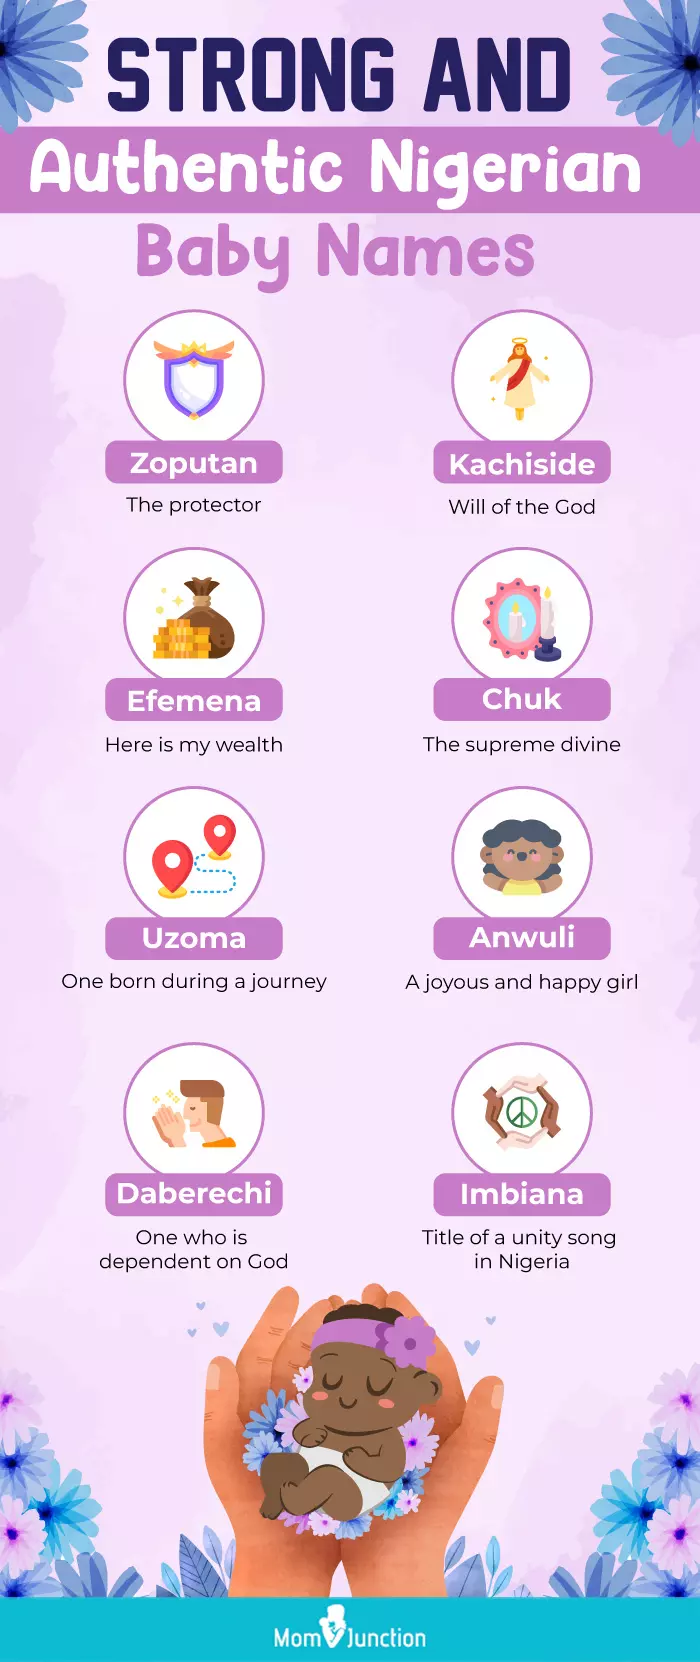 strong and authentic nigerian baby names (infographic)